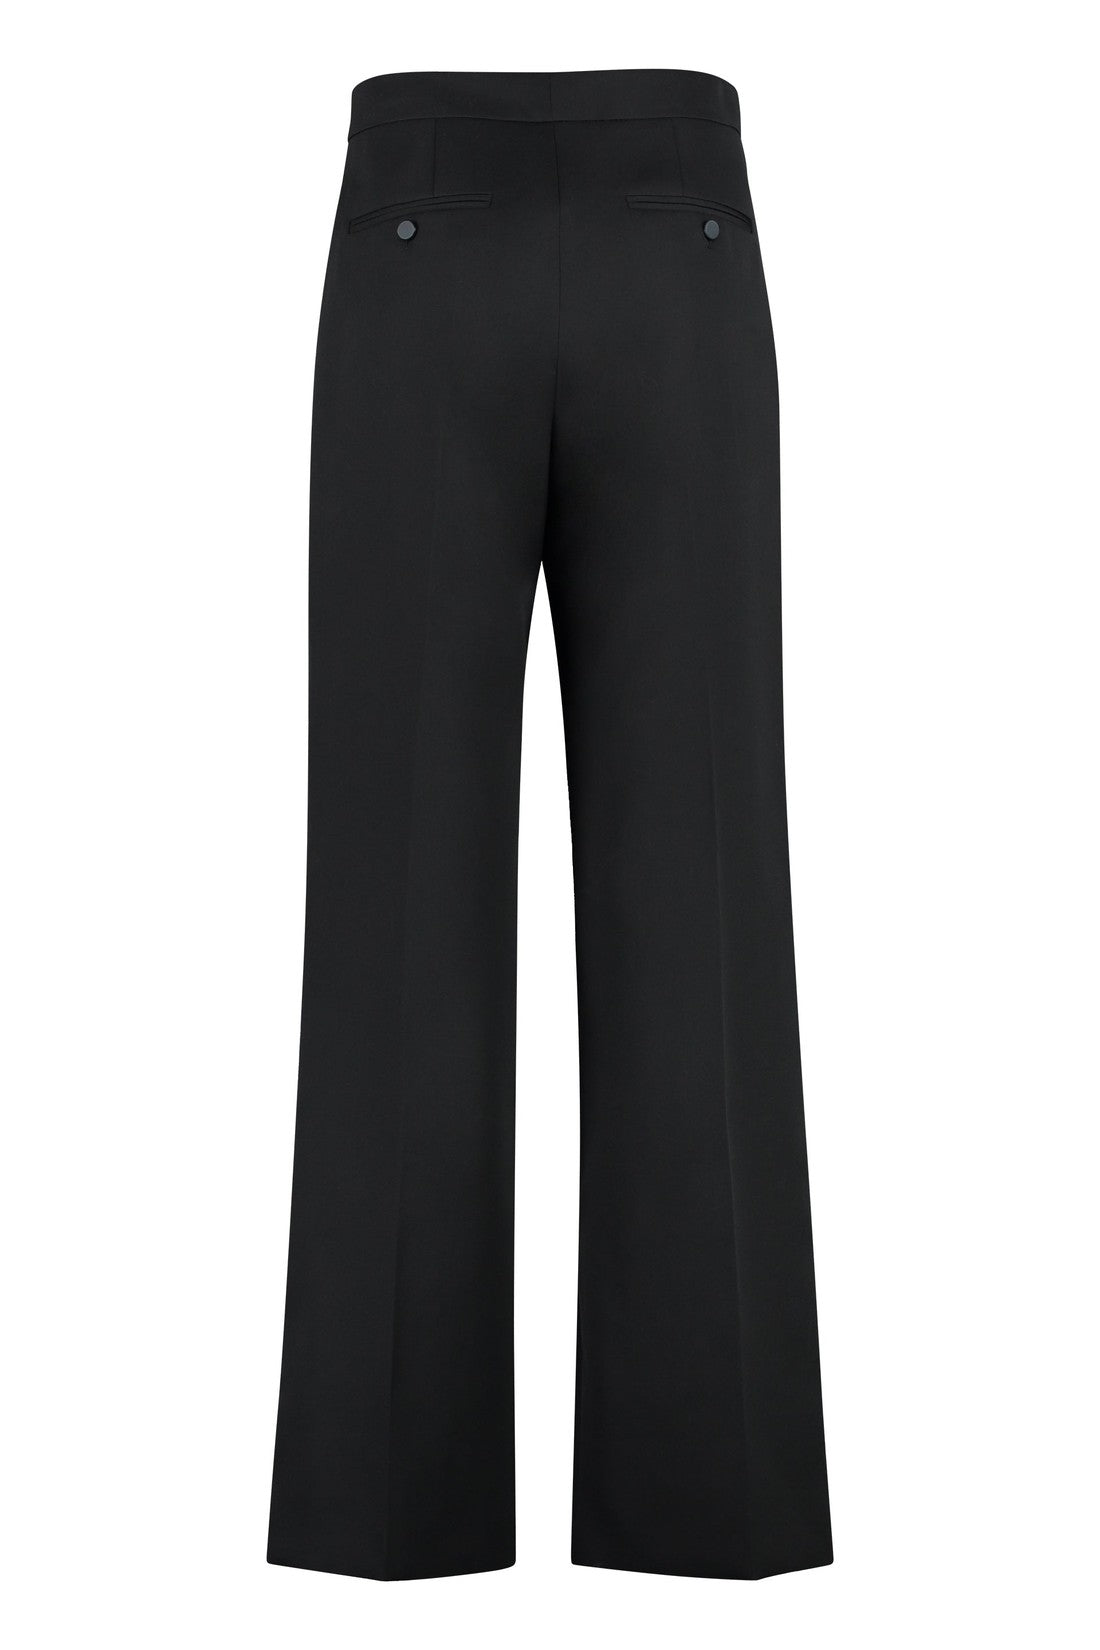 Isabel Marant-OUTLET-SALE-Scarly wool trousers-ARCHIVIST